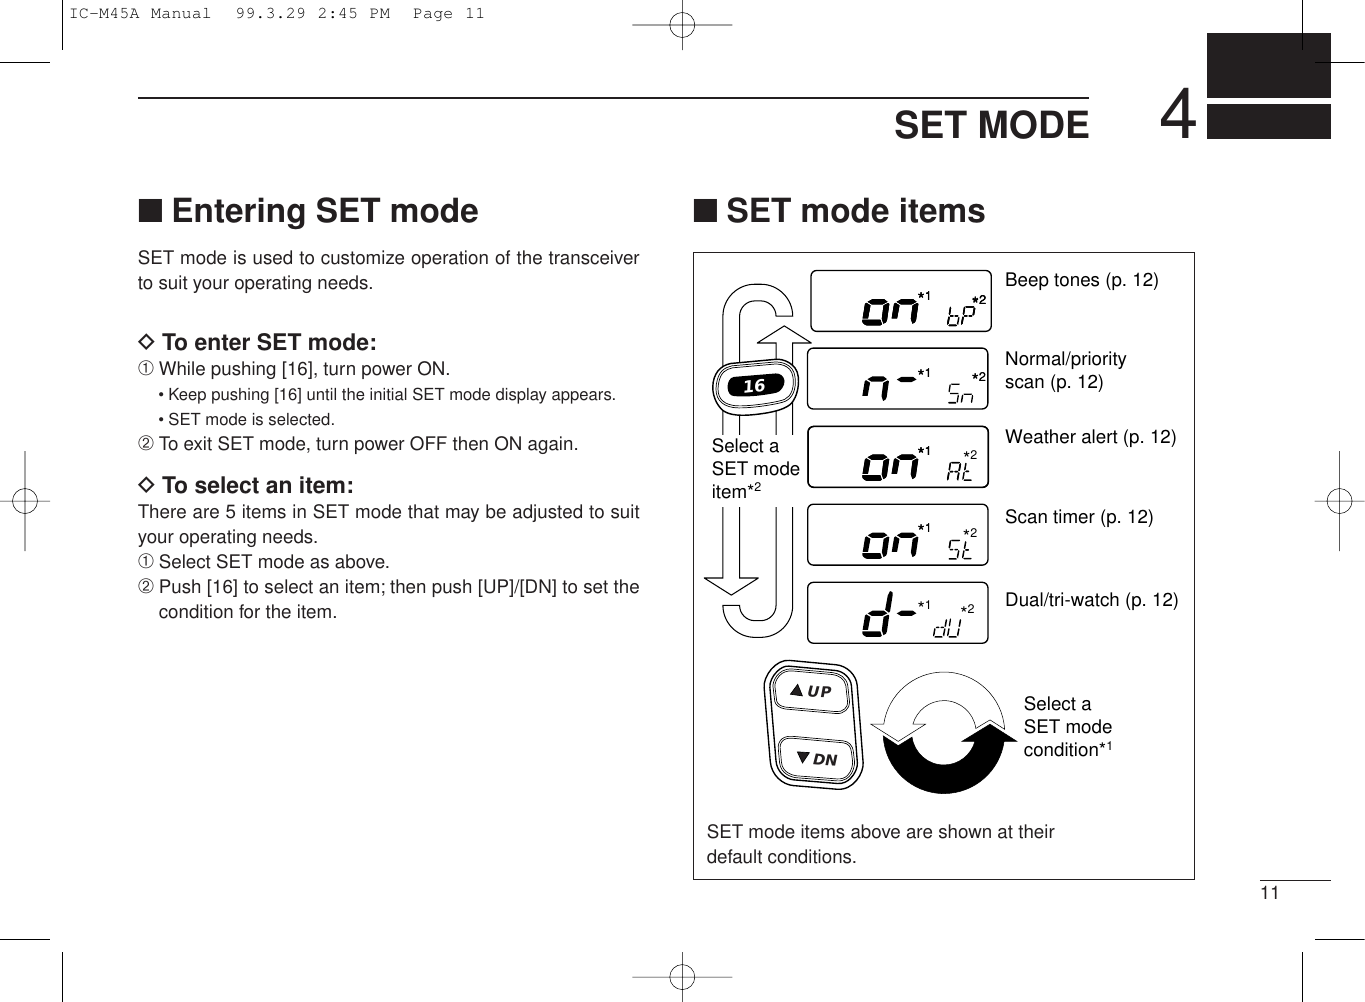 114SET MODE■Entering SET modeSET mode is used to customize operation of the transceiverto suit your operating needs.DTo enter SET mode:➀While pushing [16], turn power ON.• Keep pushing [16] until the initial SET mode display appears.• SET mode is selected.➁To exit SET mode, turn power OFF then ON again.DTo select an item:There are 5 items in SET mode that may be adjusted to suityour operating needs.➀Select SET mode as above.➁Push [16] to select an item; then push [UP]/[DN] to set thecondition for the item.■SET mode itemsBeep tones (p. 12)Normal/priorityscan (p. 12)*1*2Weather alert (p. 12)Scan timer (p. 12)Dual/tri-watch (p. 12)Select aSET modeitem*2Select aSET modecondition*116UDNP*1*2*1*2*1*1*2*1*2*1*2*1*2*1*1*1*2SET mode items above are shown at theirdefault conditions.IC-M45A Manual  99.3.29 2:45 PM  Page 11